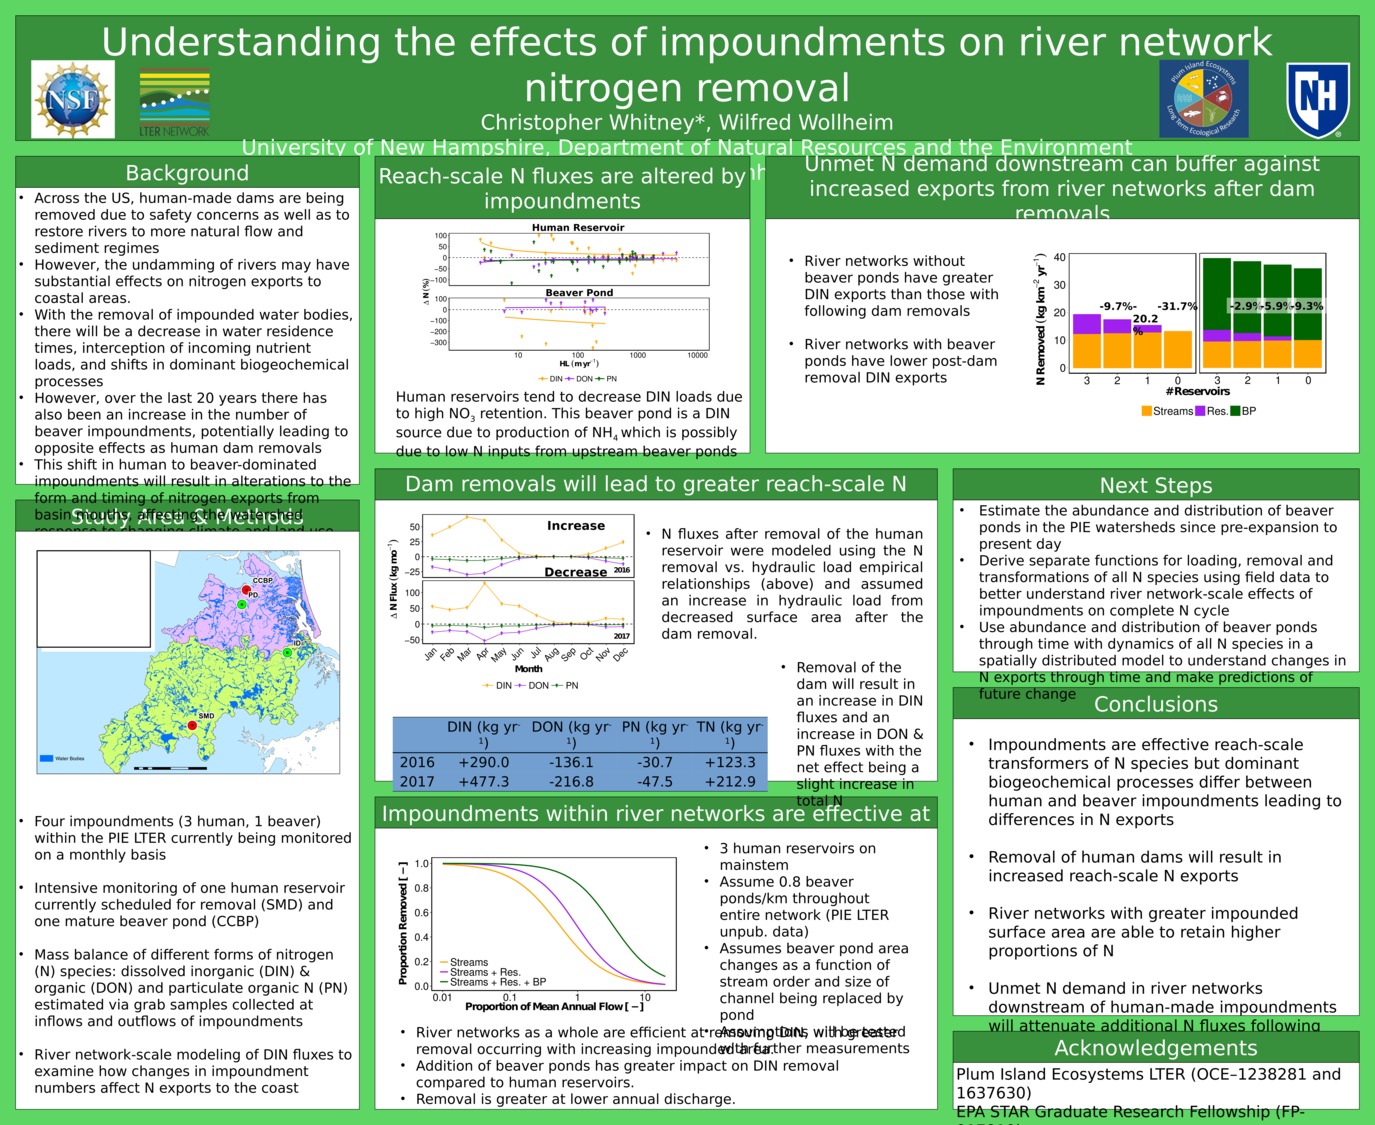 Understanding The Effects Of Impoundments On River Network Nitrogen Removal by ctw1